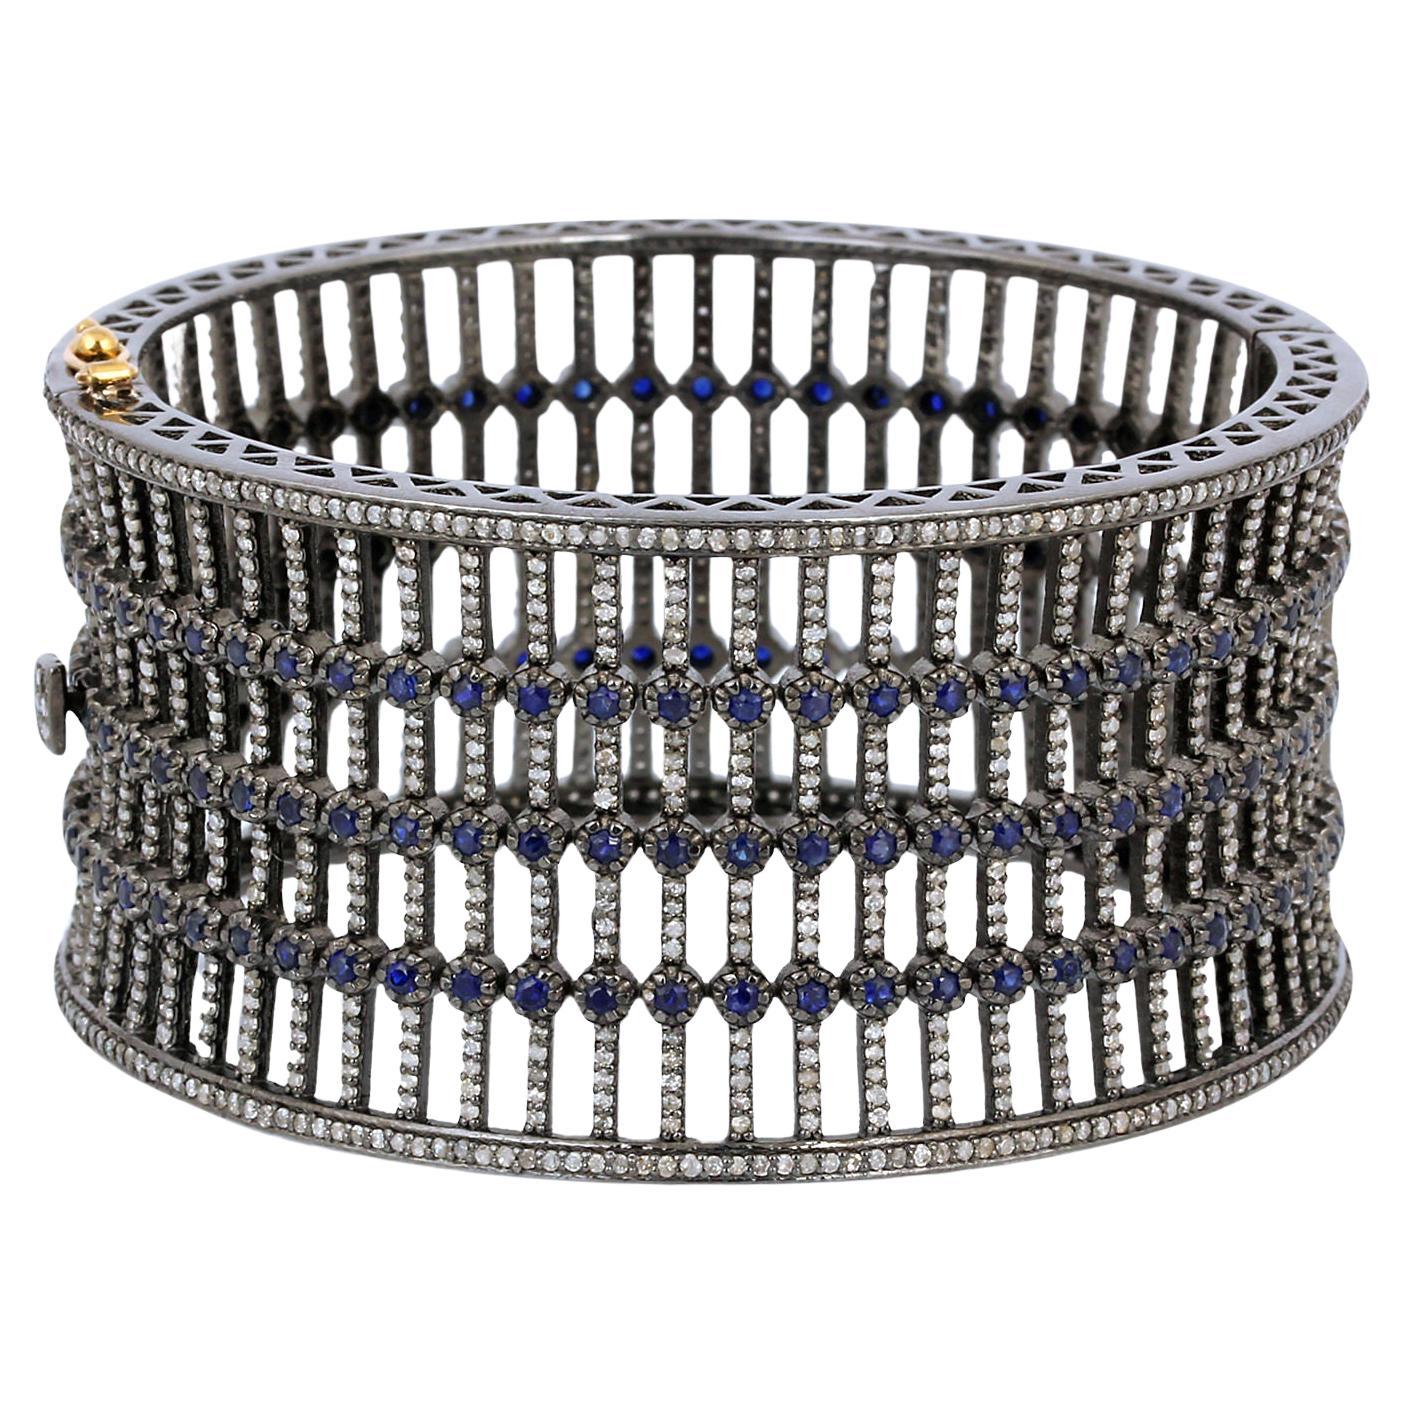 Jail Bar Style Cuff With Diamonds & Sapphire Made In 14k Gold